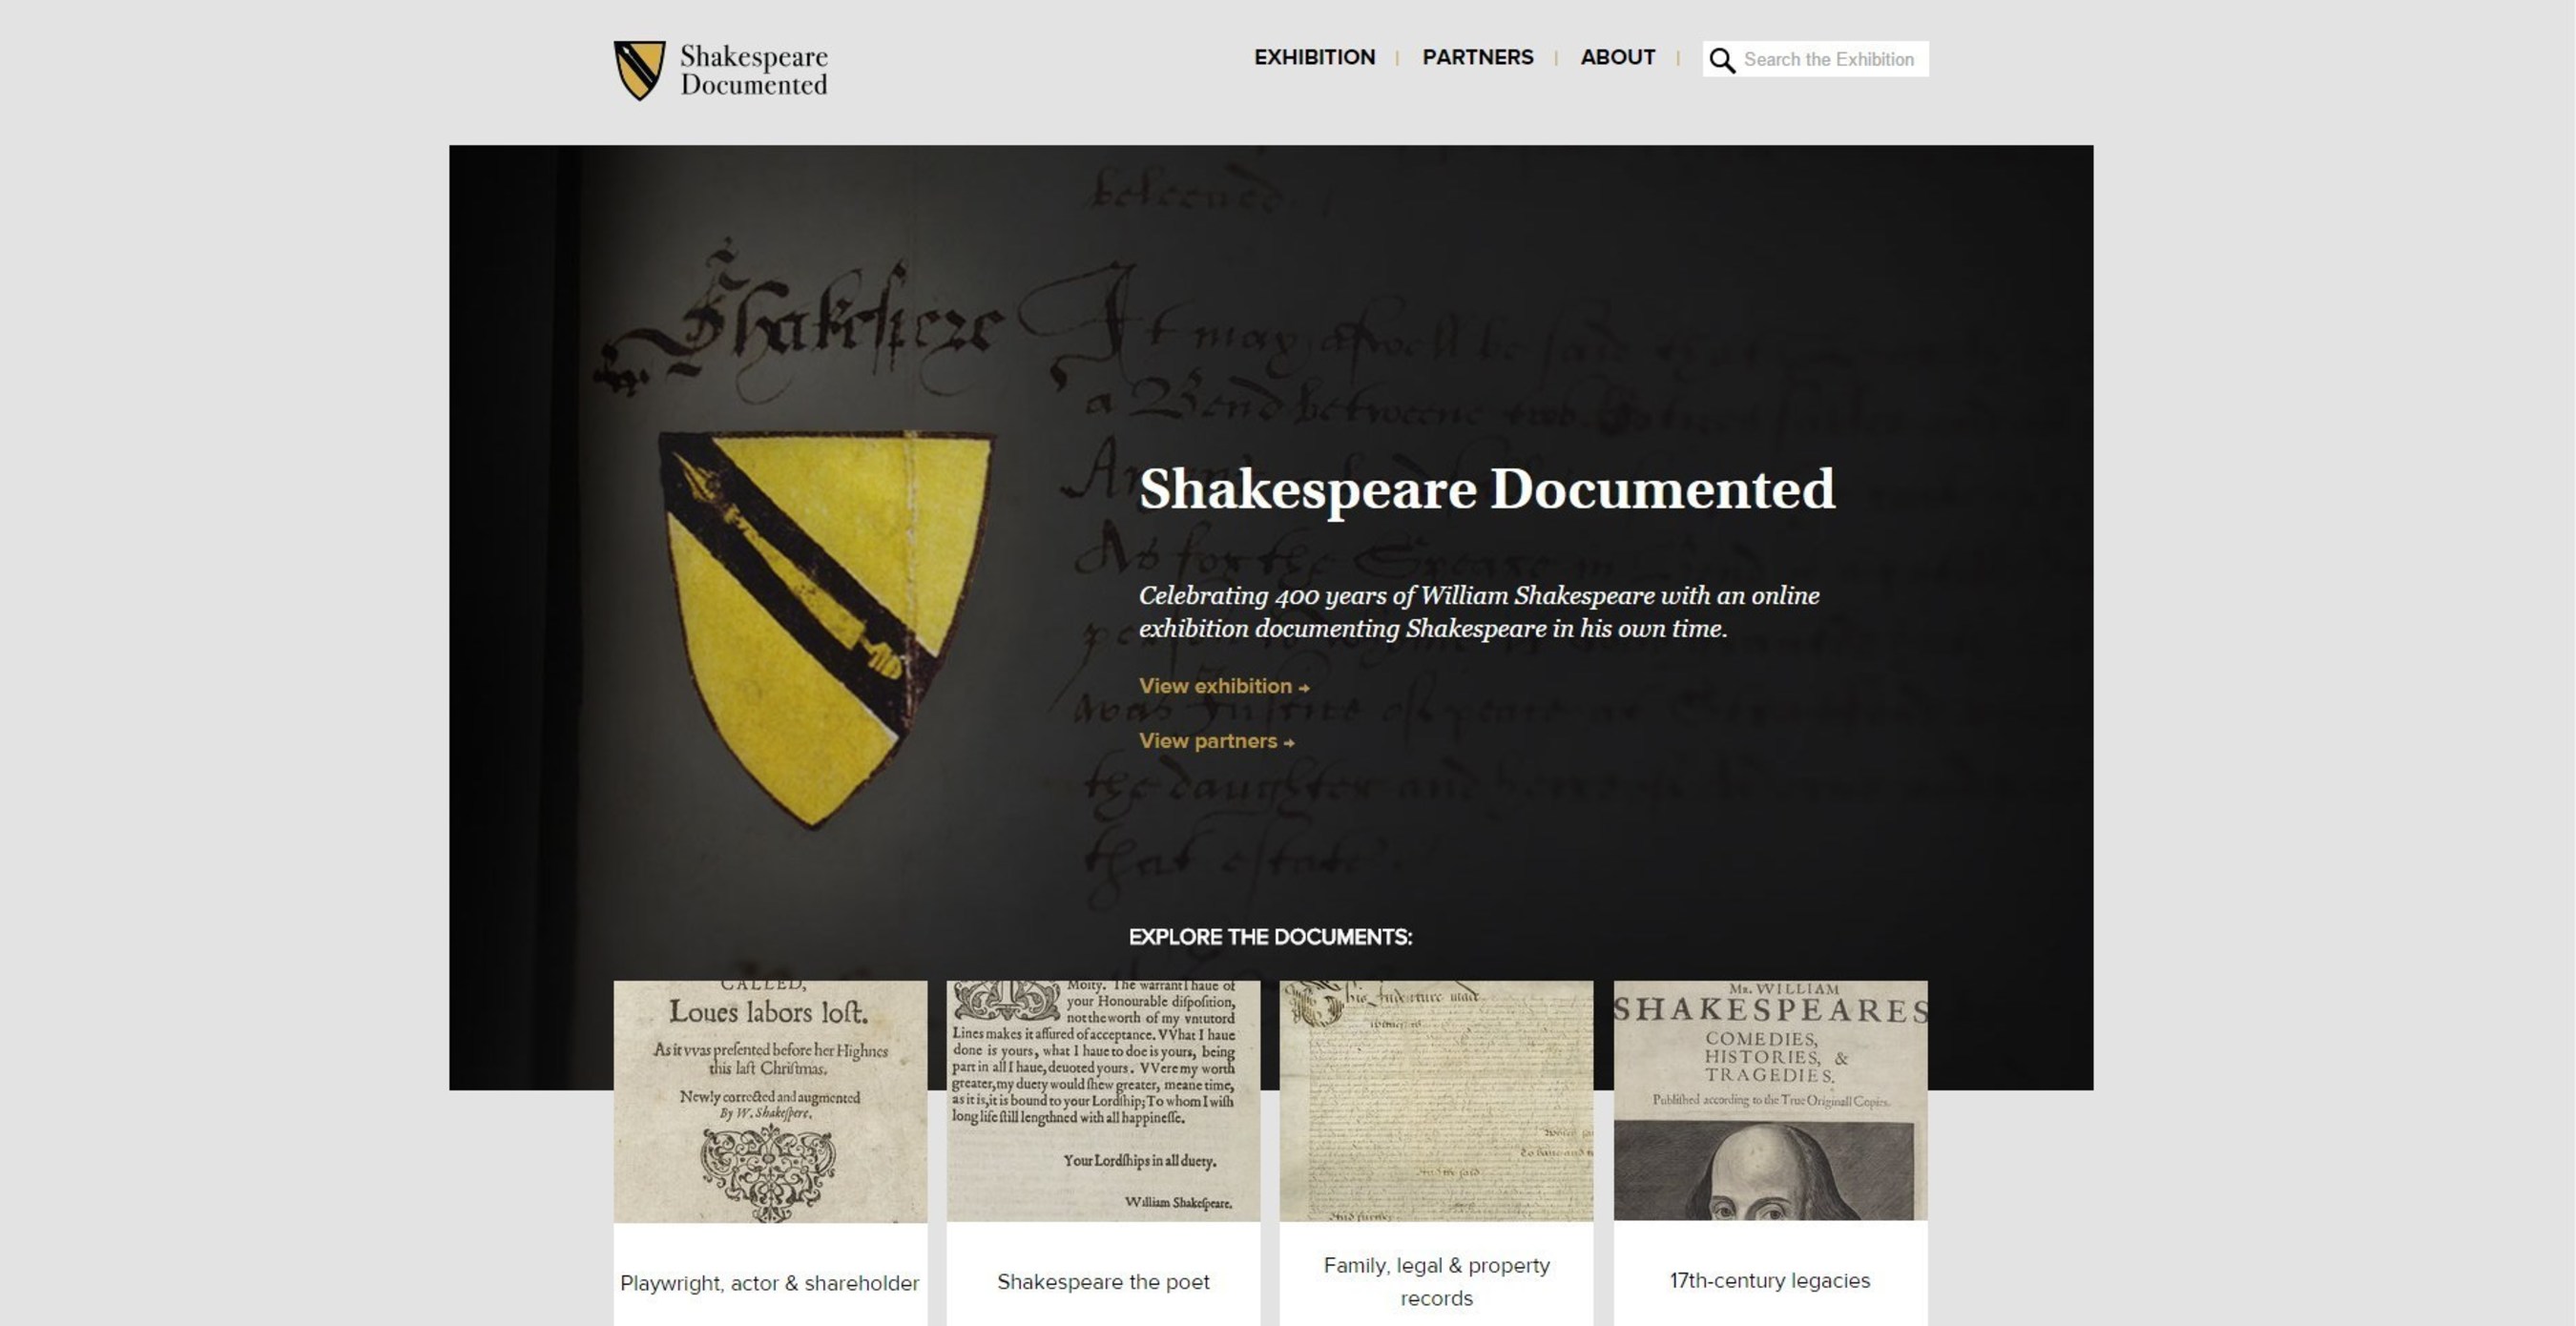 Shakespeare Documented is a new online resource sharing the manuscripts and printed books that document the life and career of William Shakespeare.